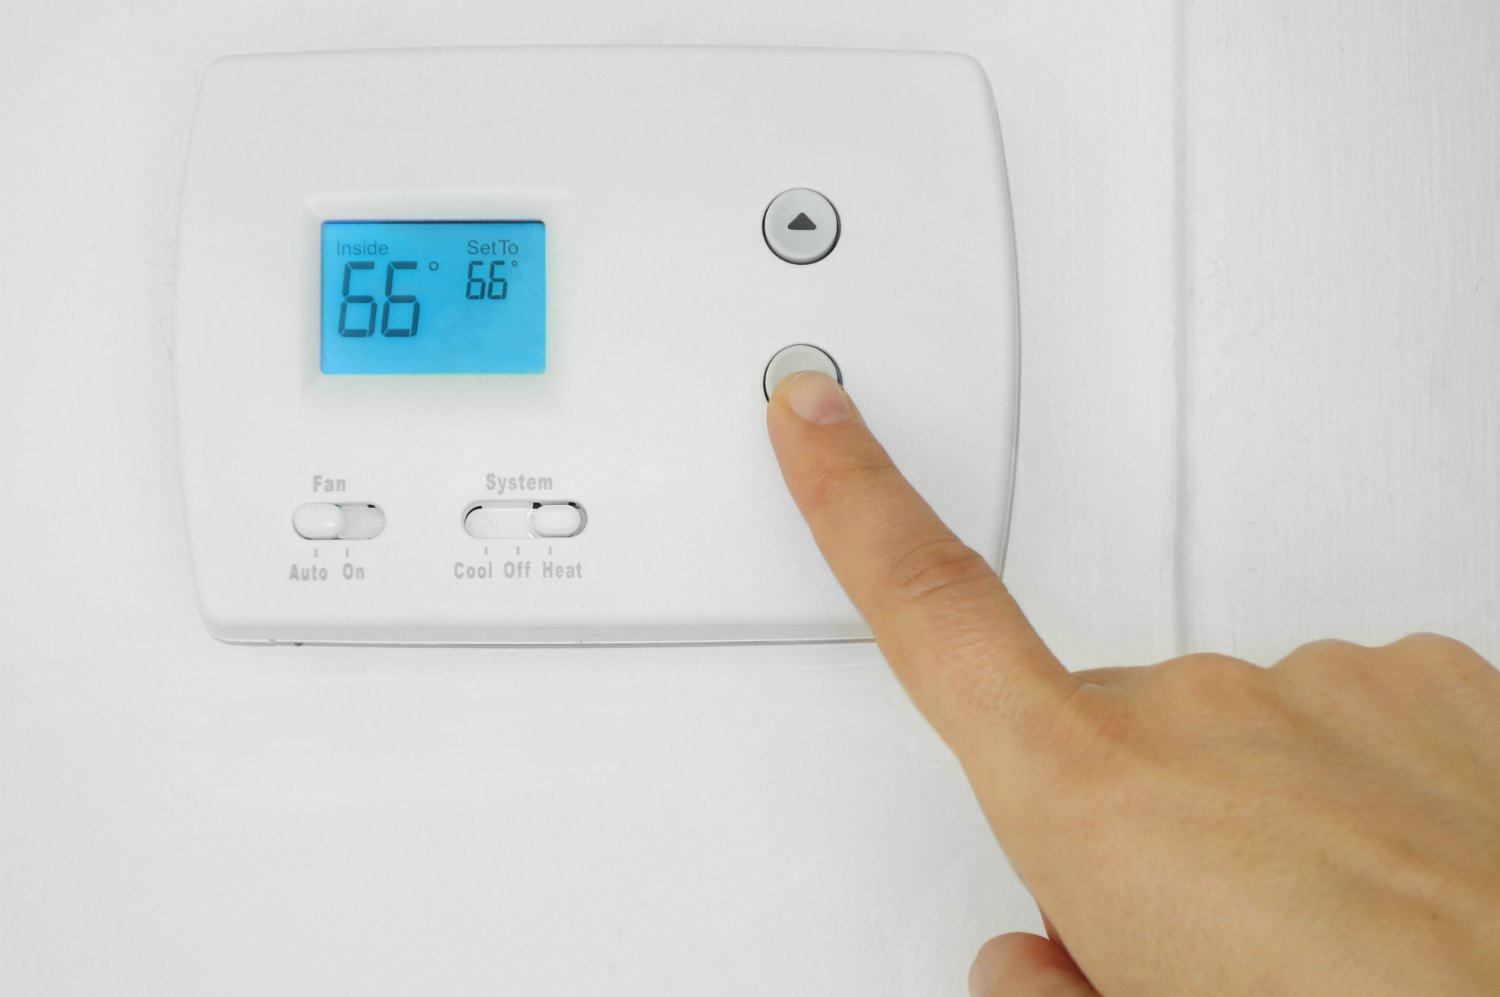 How To Turn Off An Air Conditioning Unit